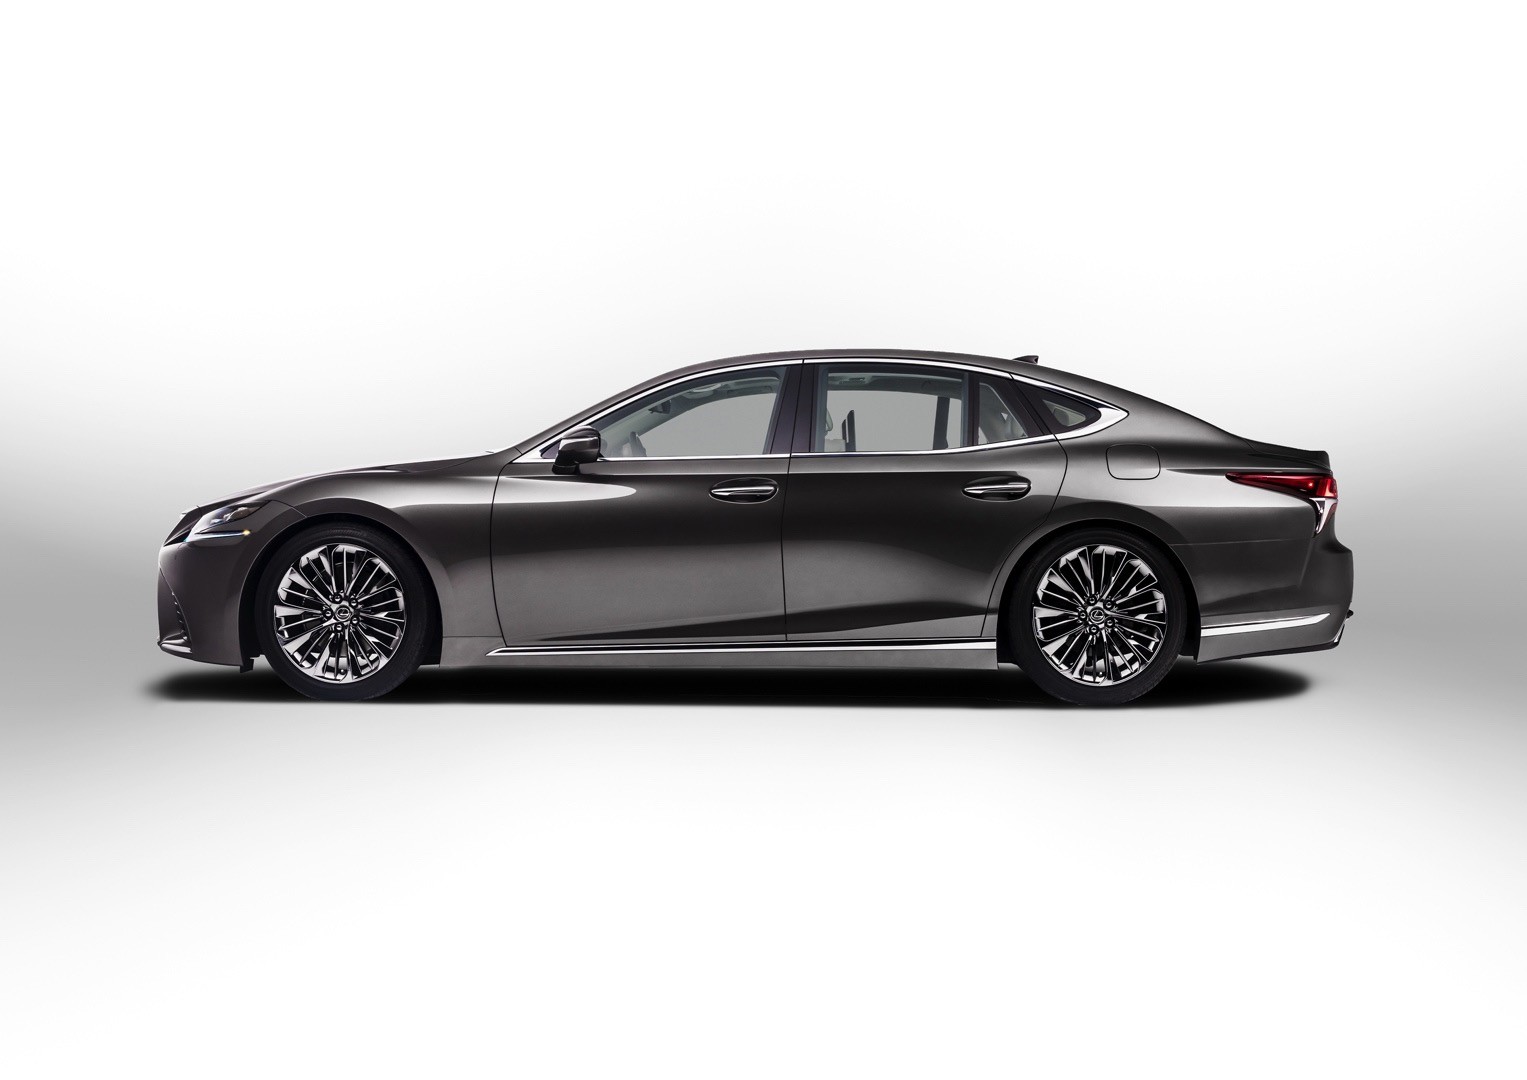 entry-level-2018-lexus-ls-350-launched-in-china-with-35-liter-n-a-v6-engine_3.jpg